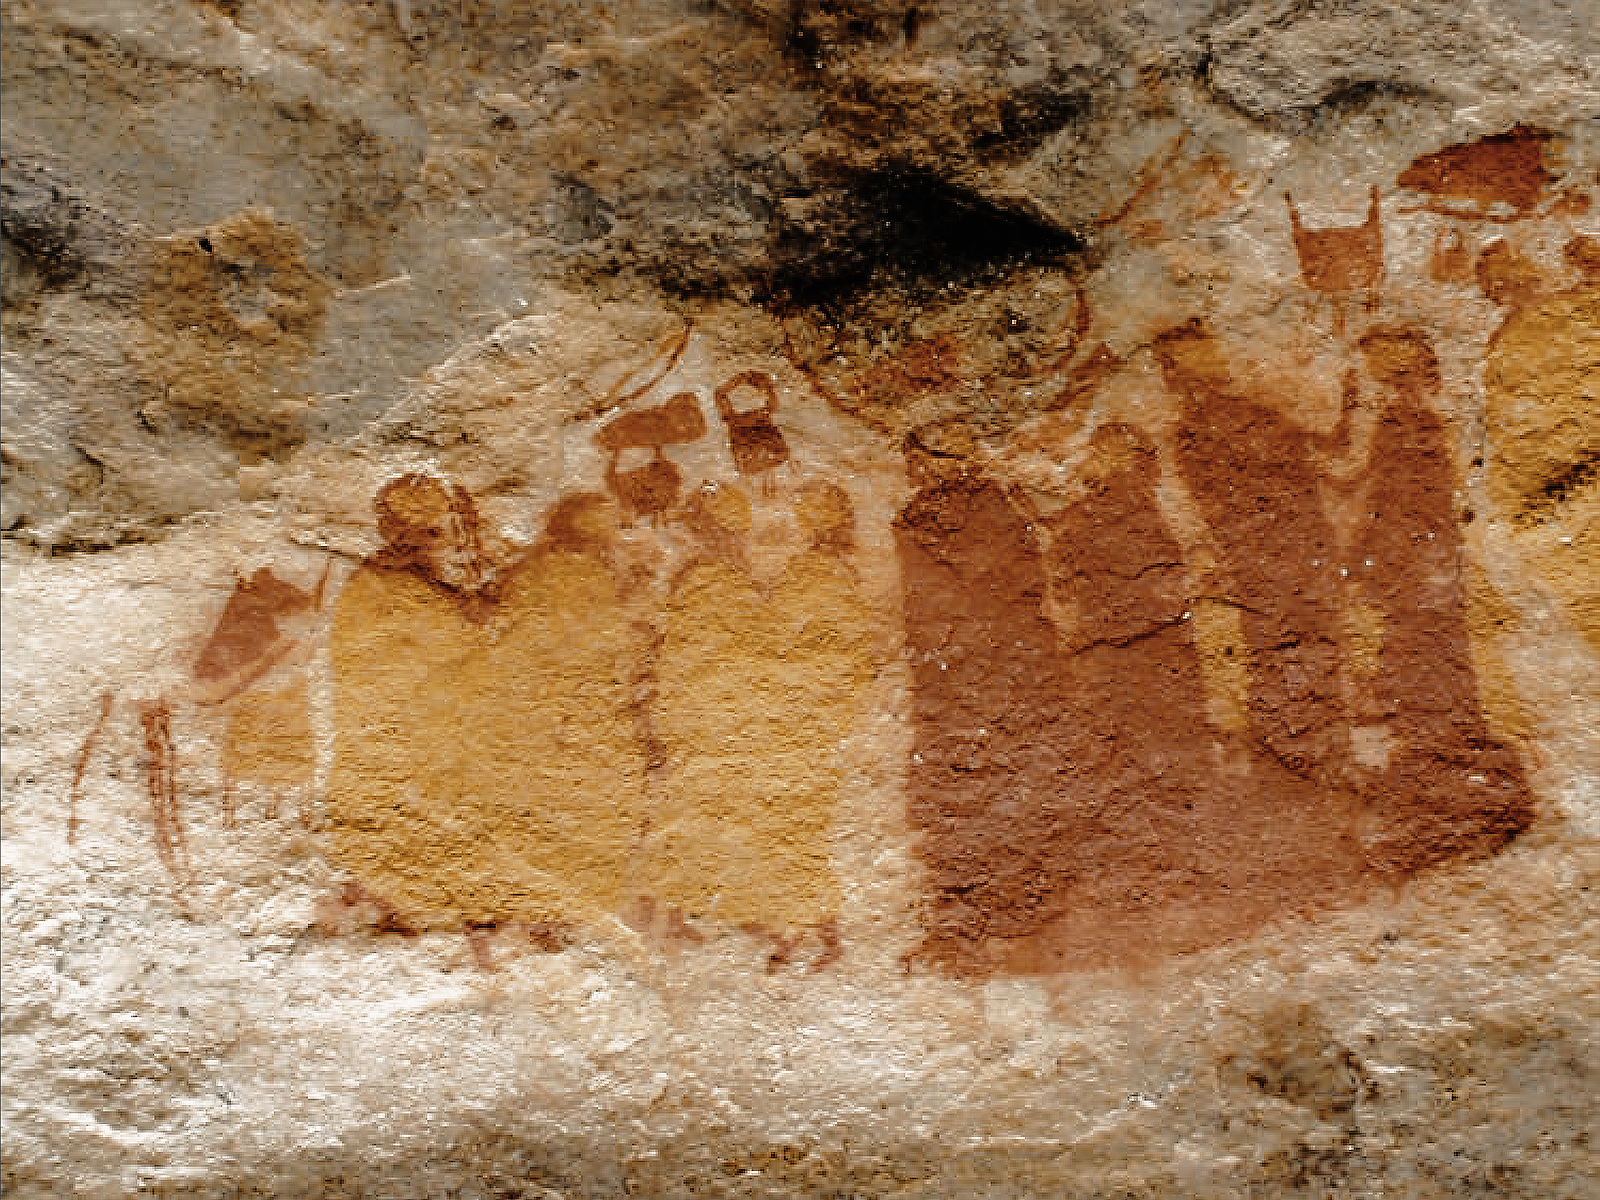 Rock Art Southern Africa Getty Conservation Institute Bradshaw Foundation